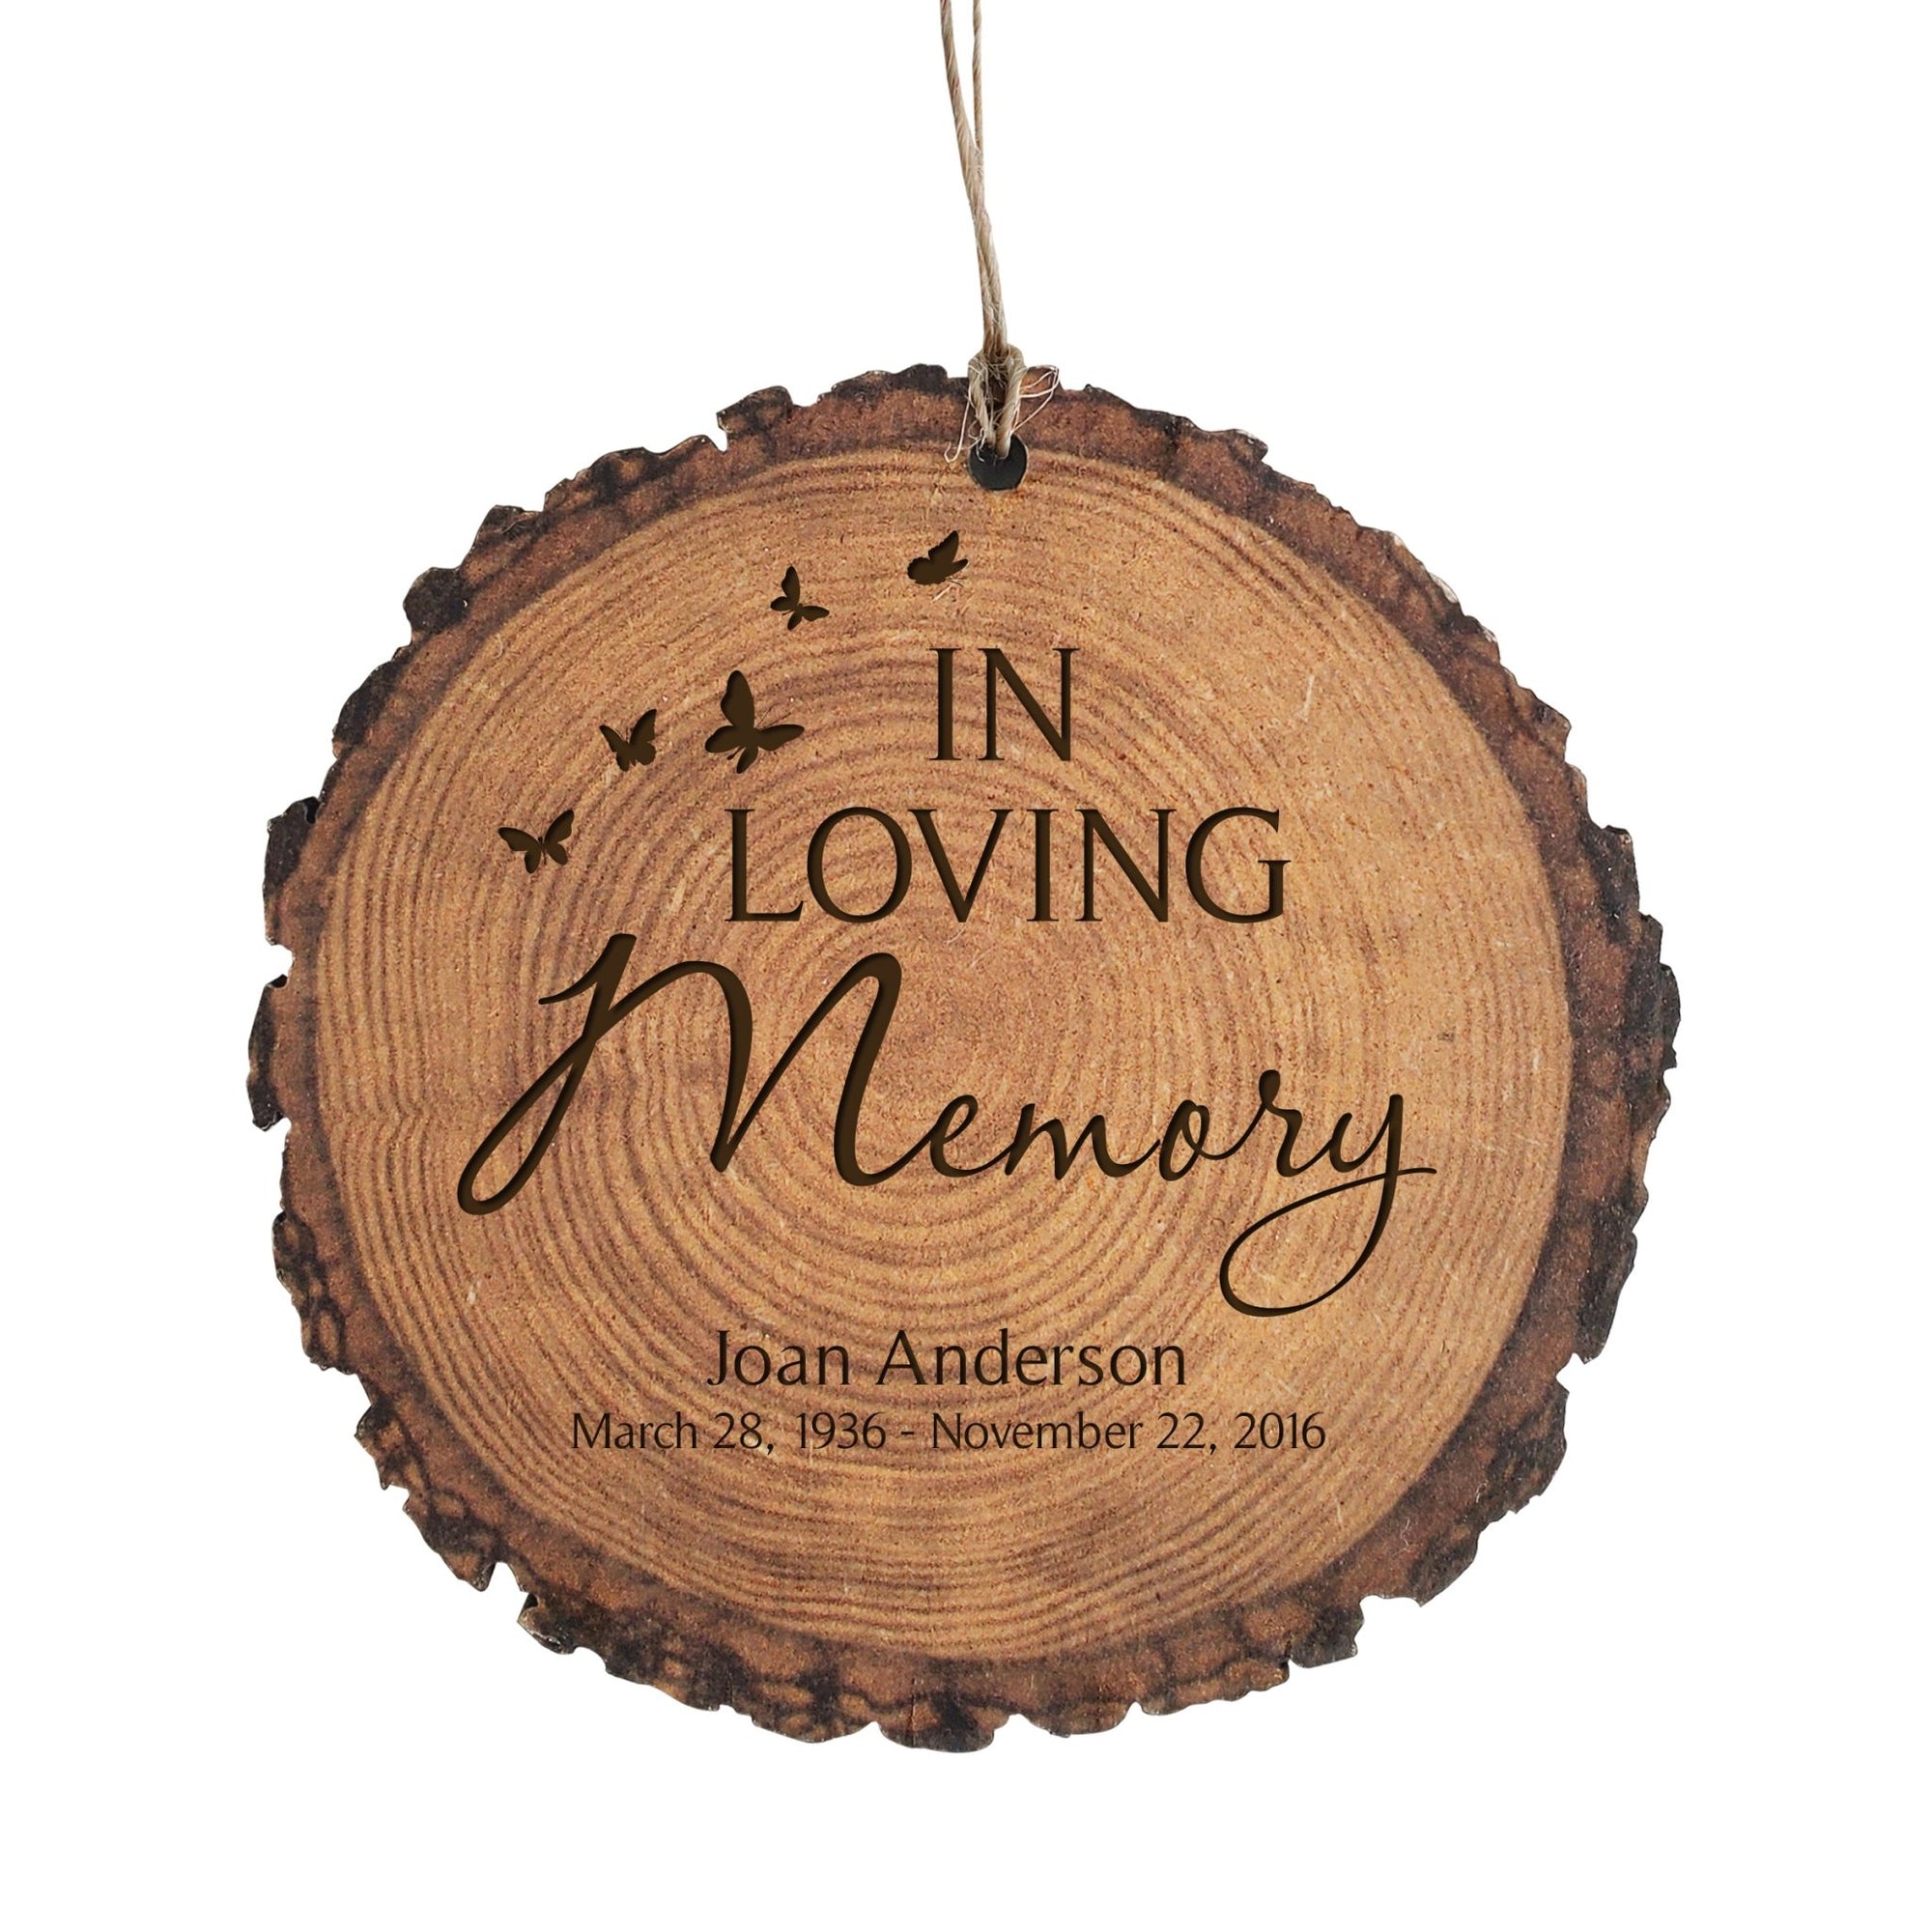 LifeSong Milestones Engraved Hanging Memorial Barky Ornament for Loss of Loved One